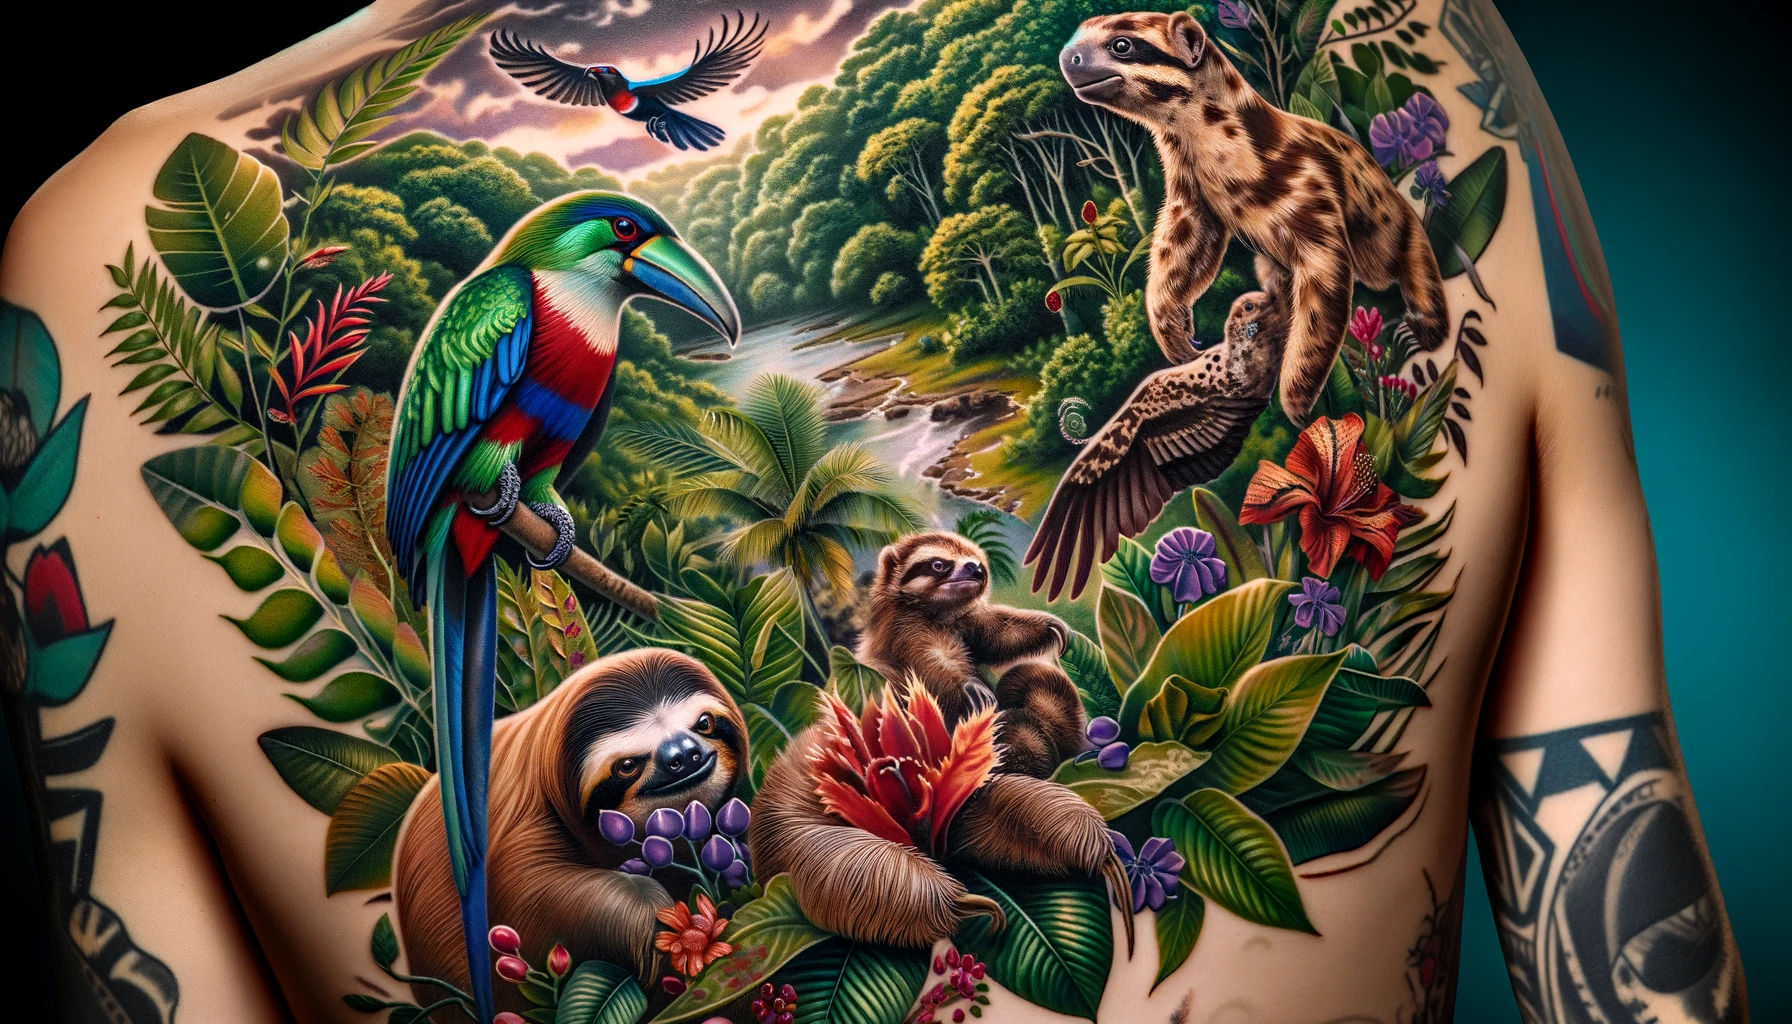 DALL·E 2024-03-25 16.16.56 - A realistic tattoo design featuring a diverse range of Costa Rican flora and fauna, inked on a person's skin. The tattoo should include iconic wildlif